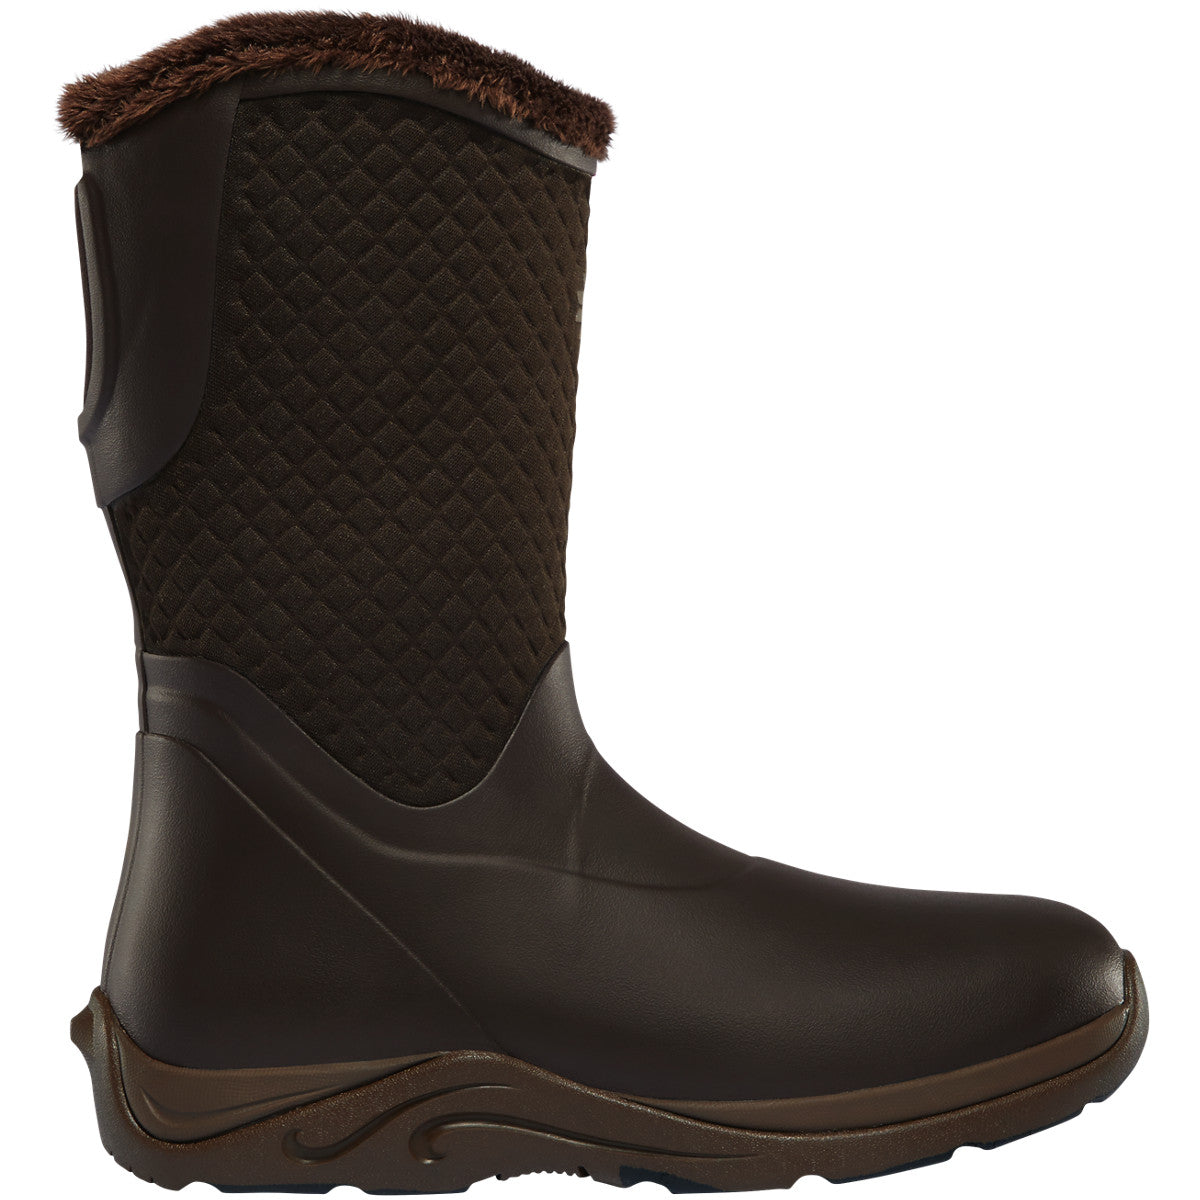 Lacrosse Women's Alpha Cozy 10" Soft Toe WP Rubber Boot - Brown - 656111 5 / Brown - Overlook Boots